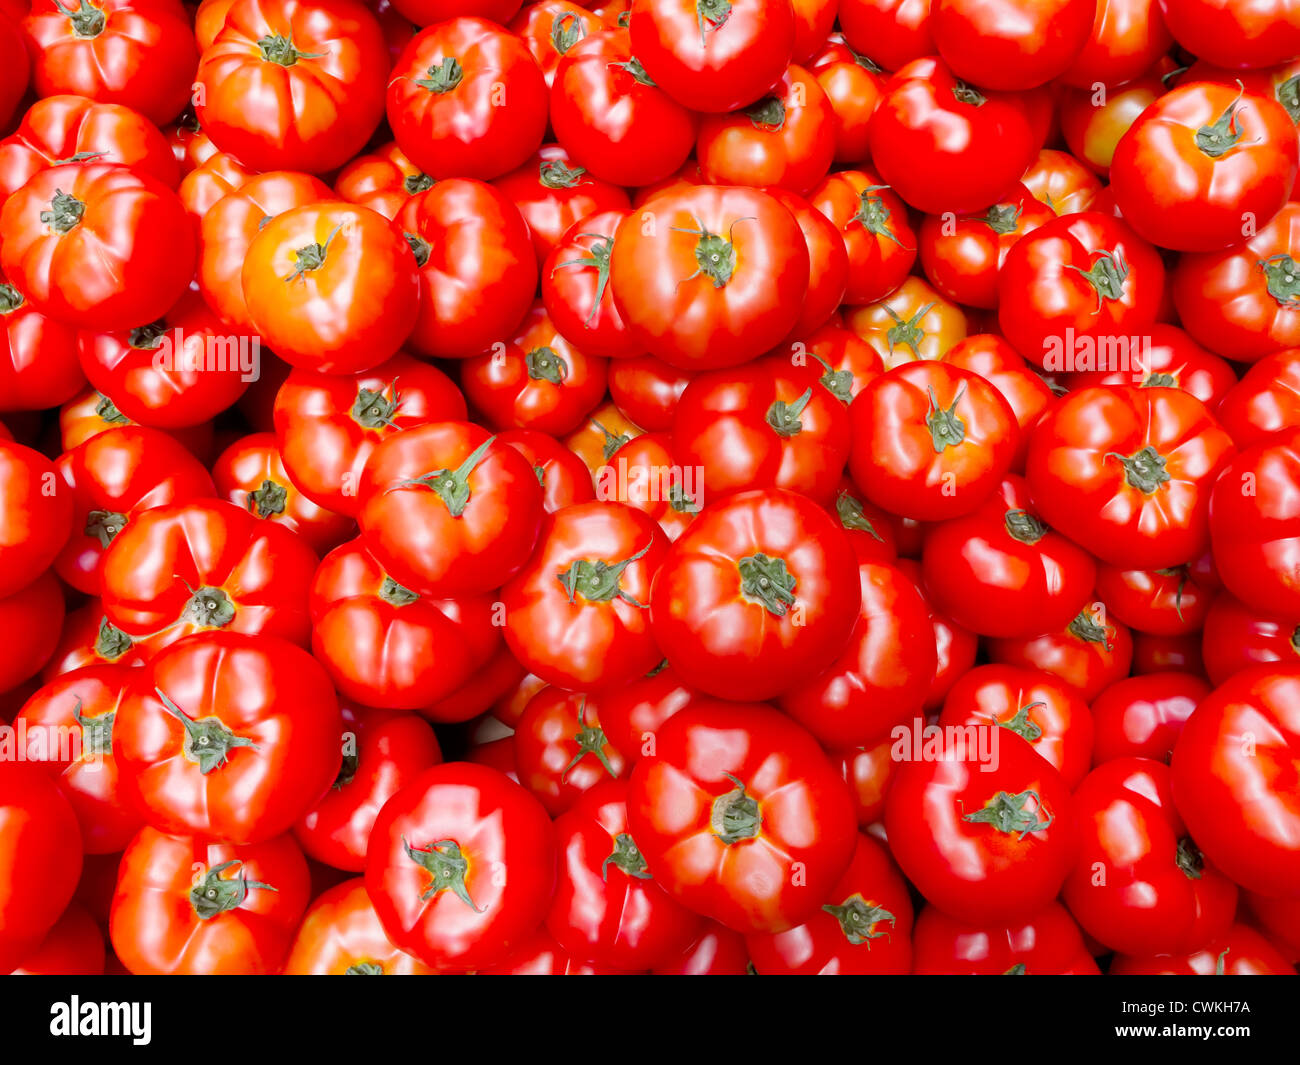 Stack of ripe and plump red tomatoes Stock Photo